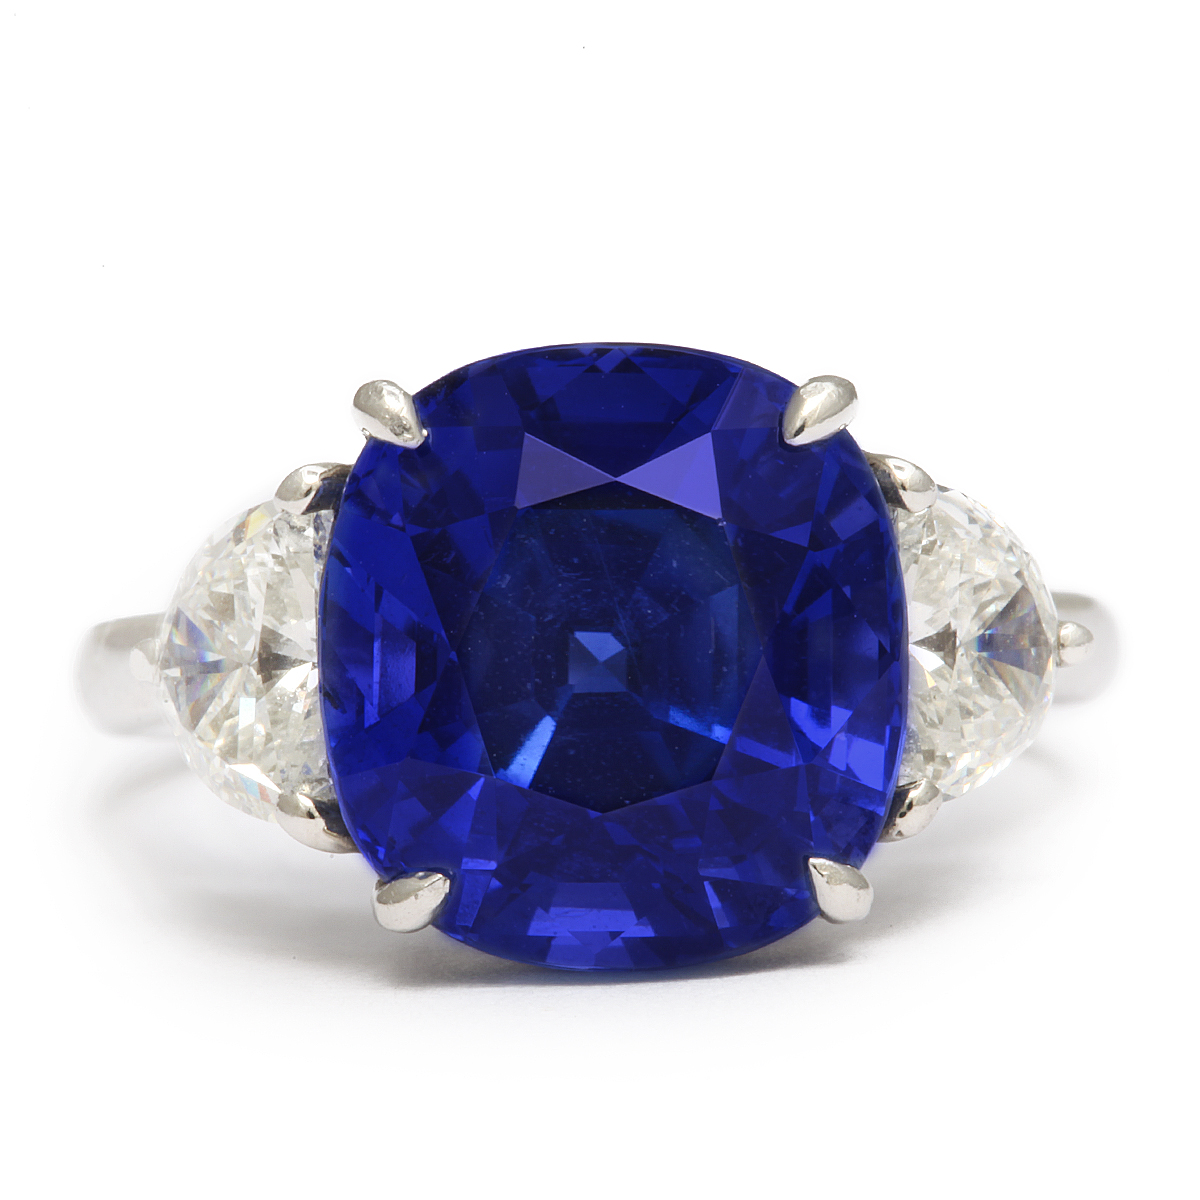 A La Vieille Russie| Mid-Century Sapphire and Diamond Ring